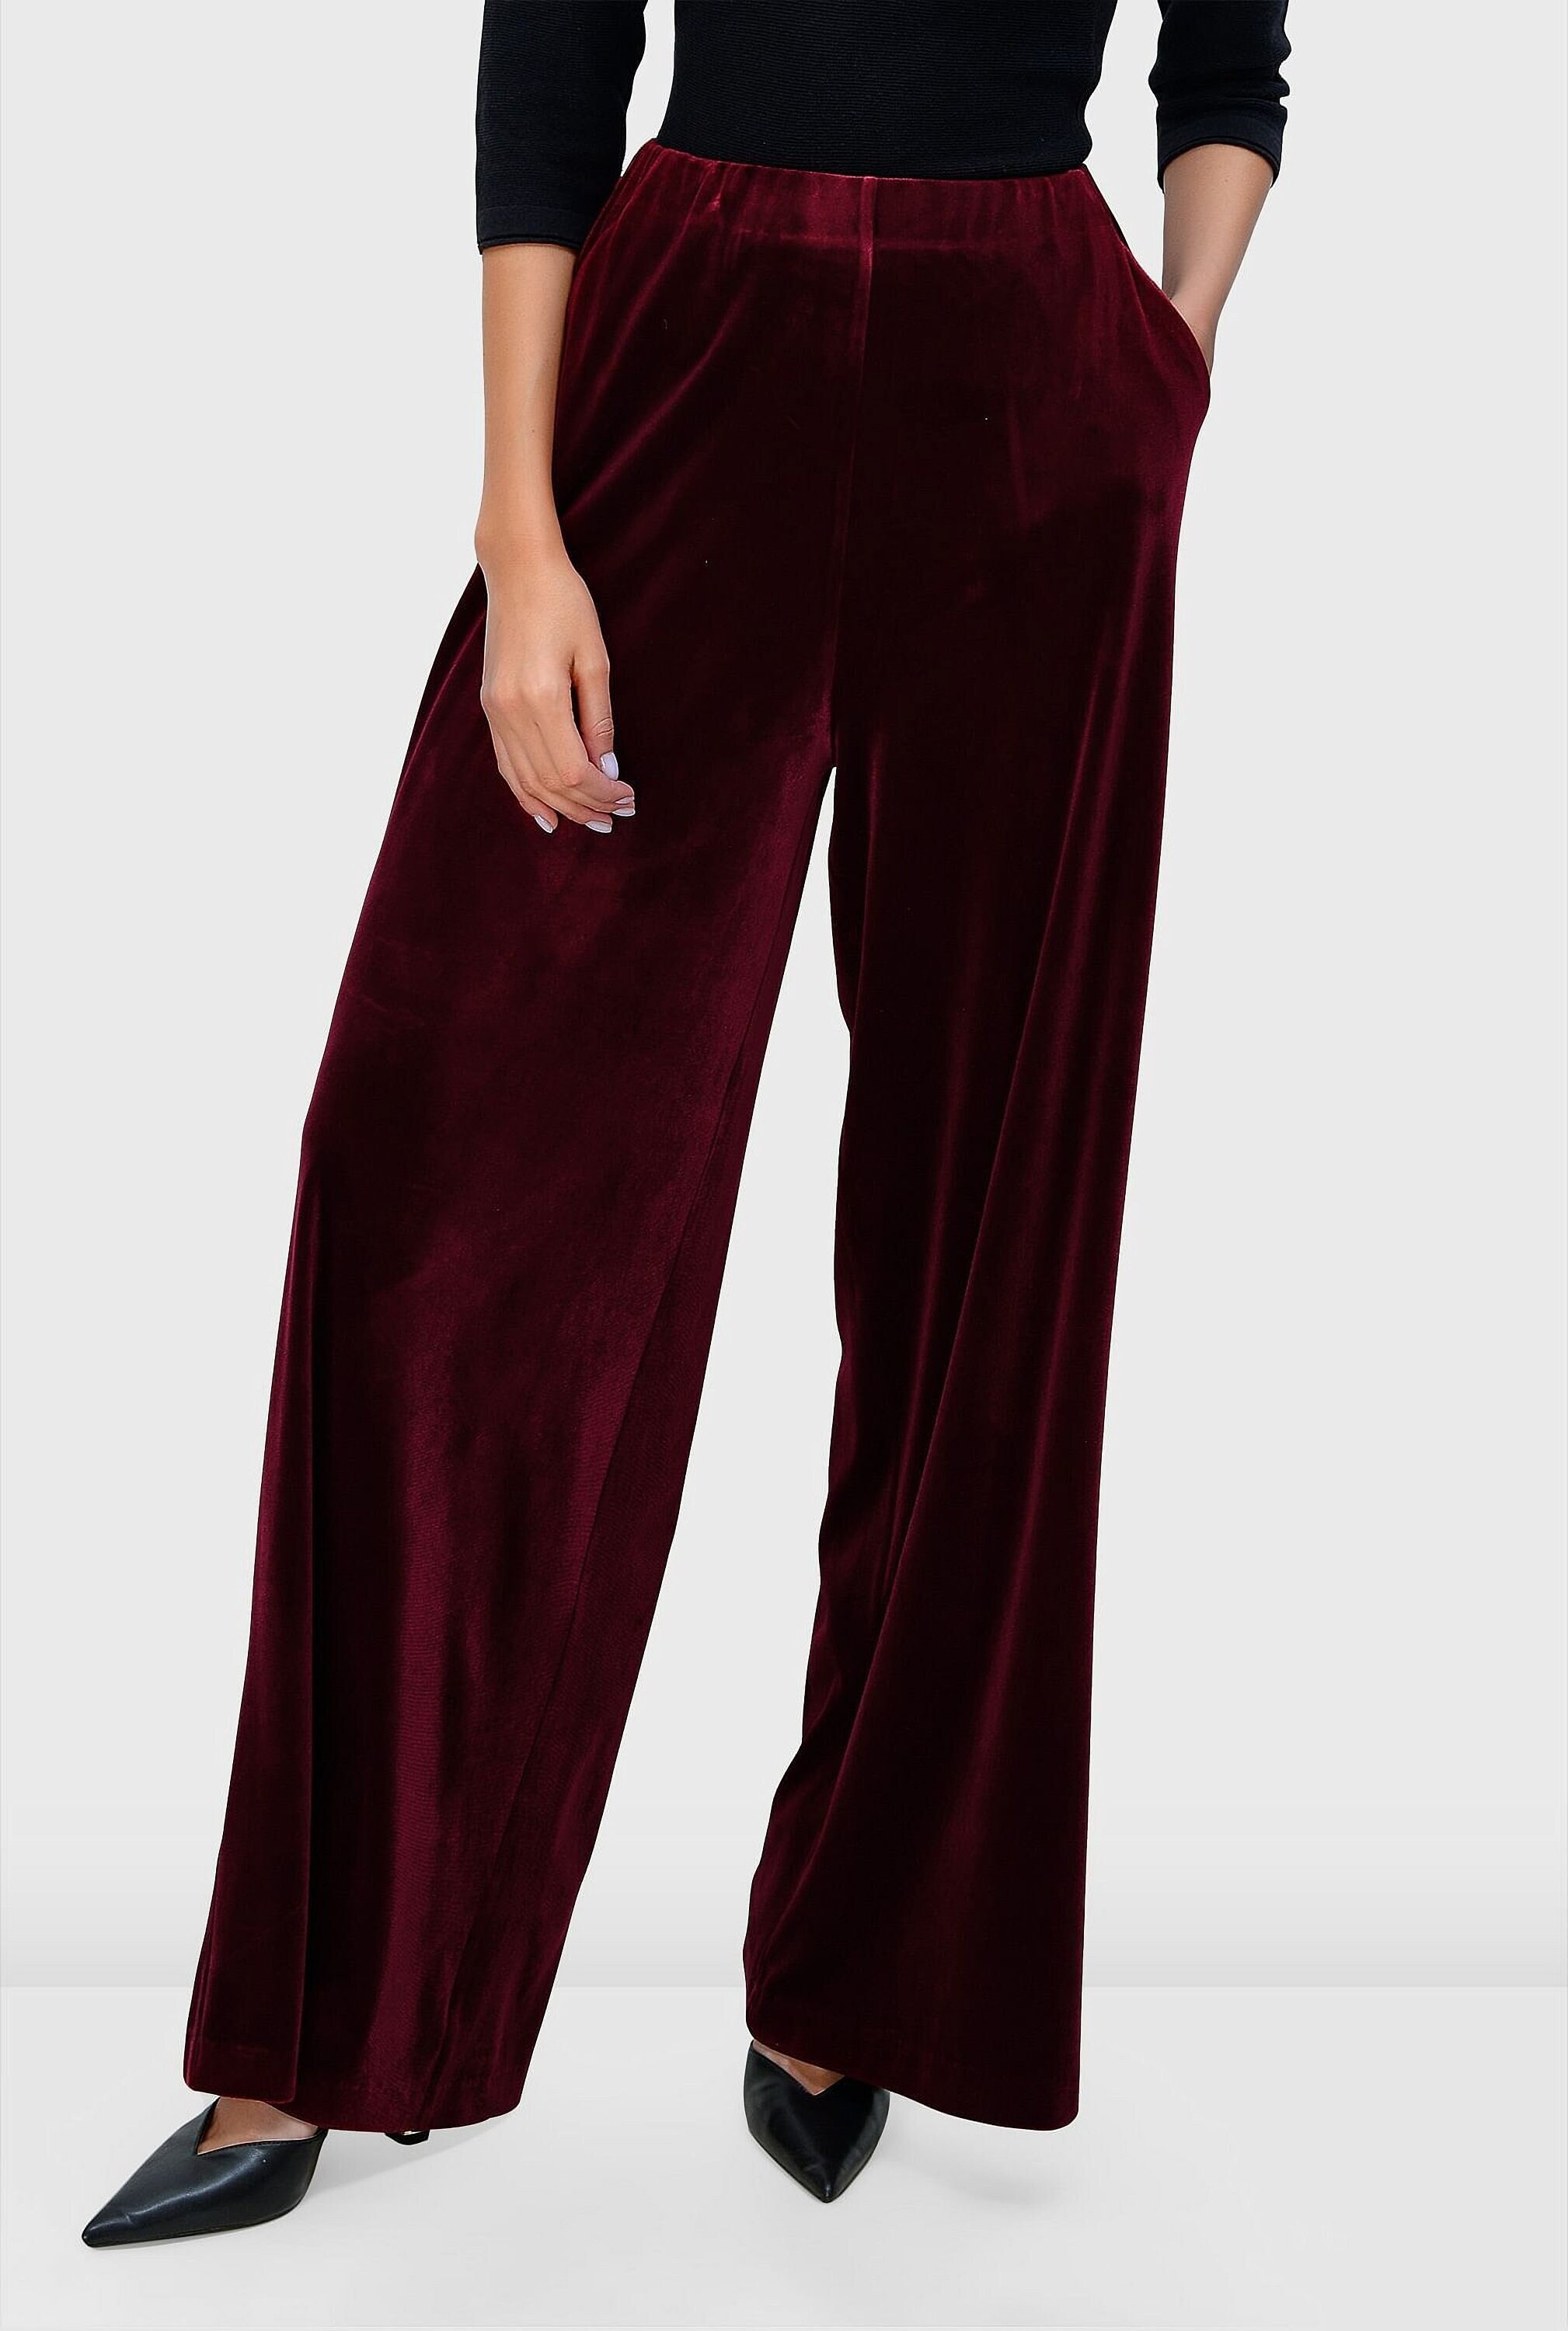 Buy INDYA Solid Velvet Regular Fit Womens Casual Trousers  Shoppers Stop